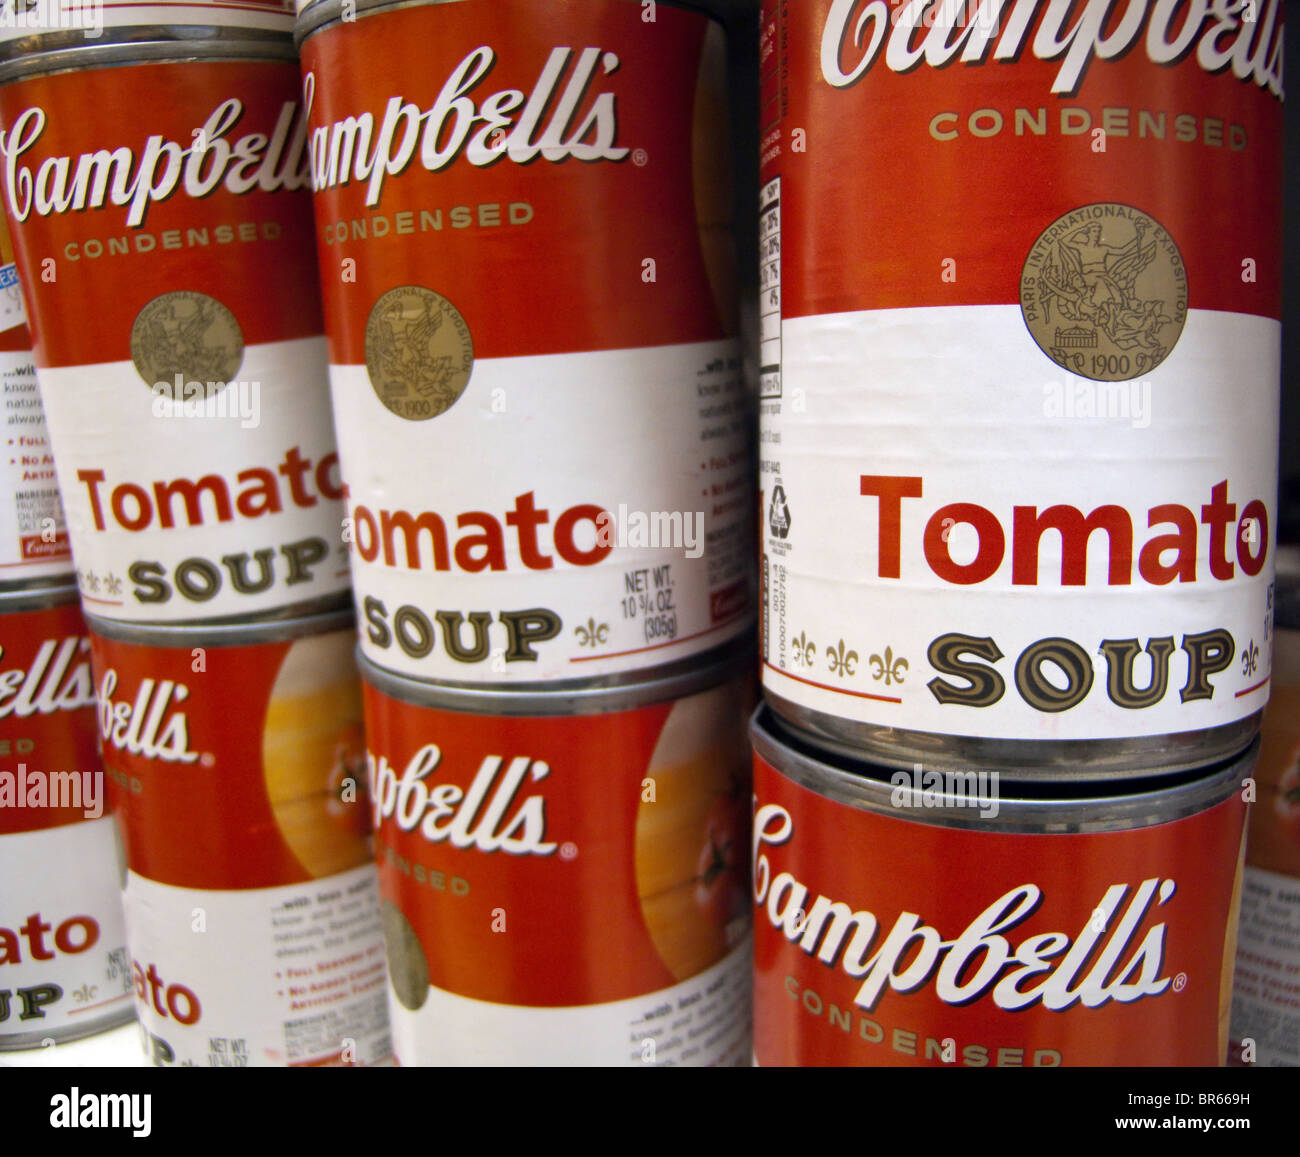 Cans of Campbell's Tomato Soup are seen in a supermarket in New York on Tuesday, September 14, 2010. (© Richard B. Levine) Stock Photo